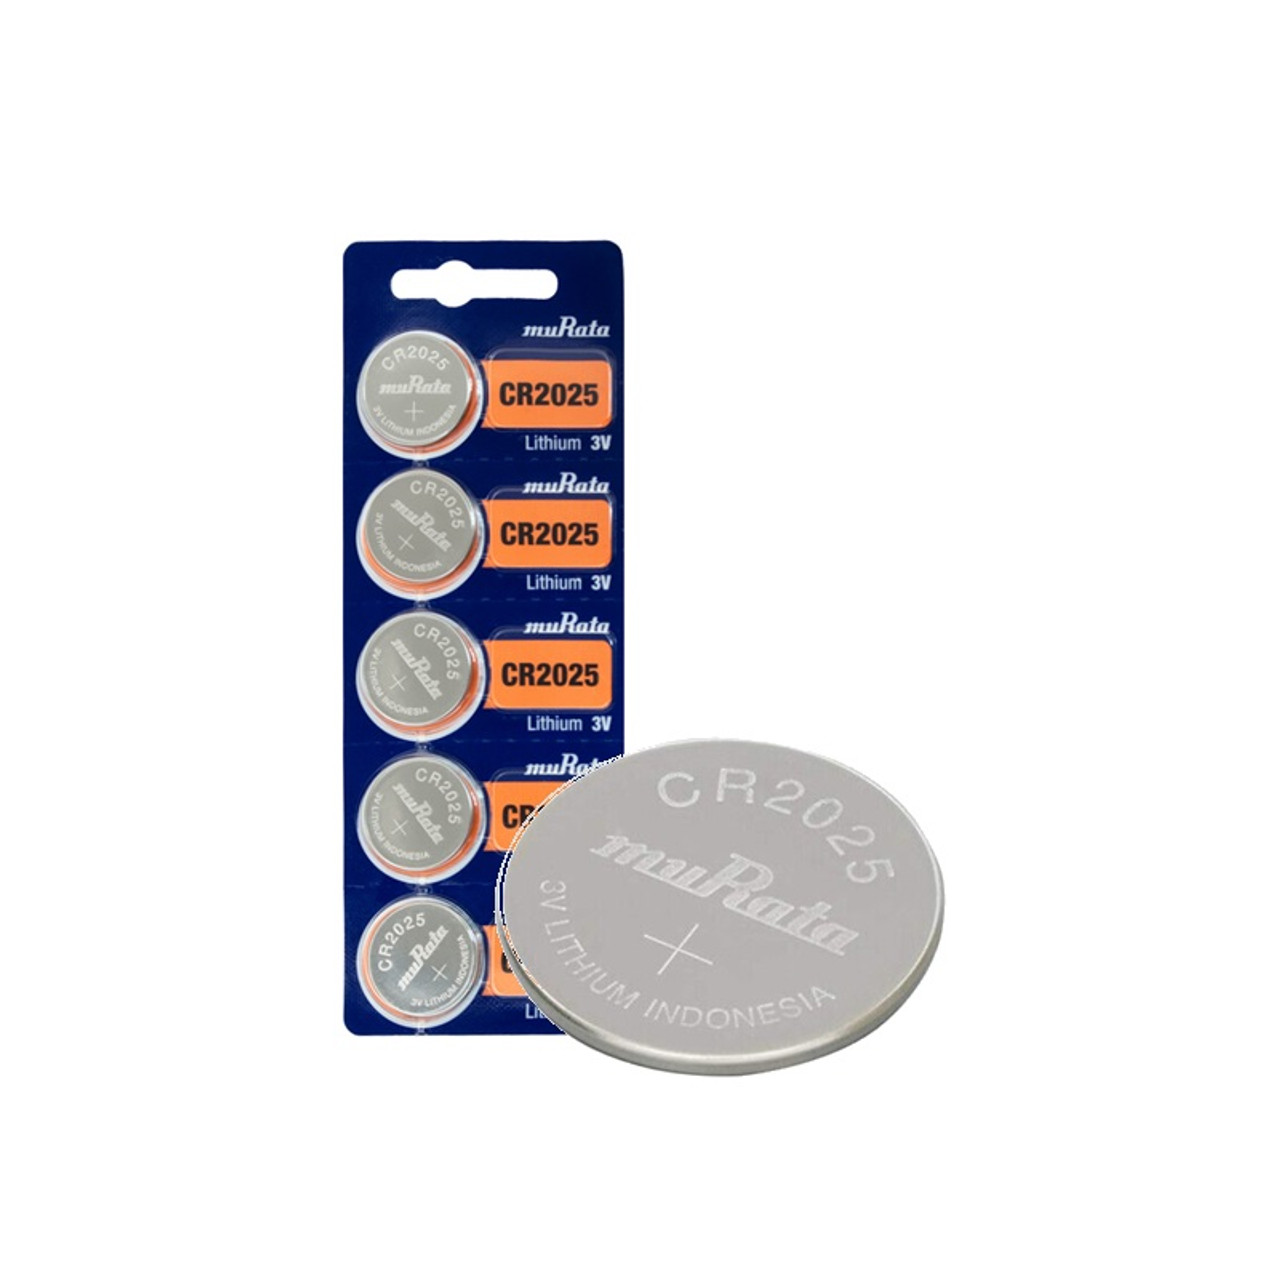 Murata CR2016 Battery 3V Lithium Coin Cell - Replaces Sony CR2016 (5  Batteries) 